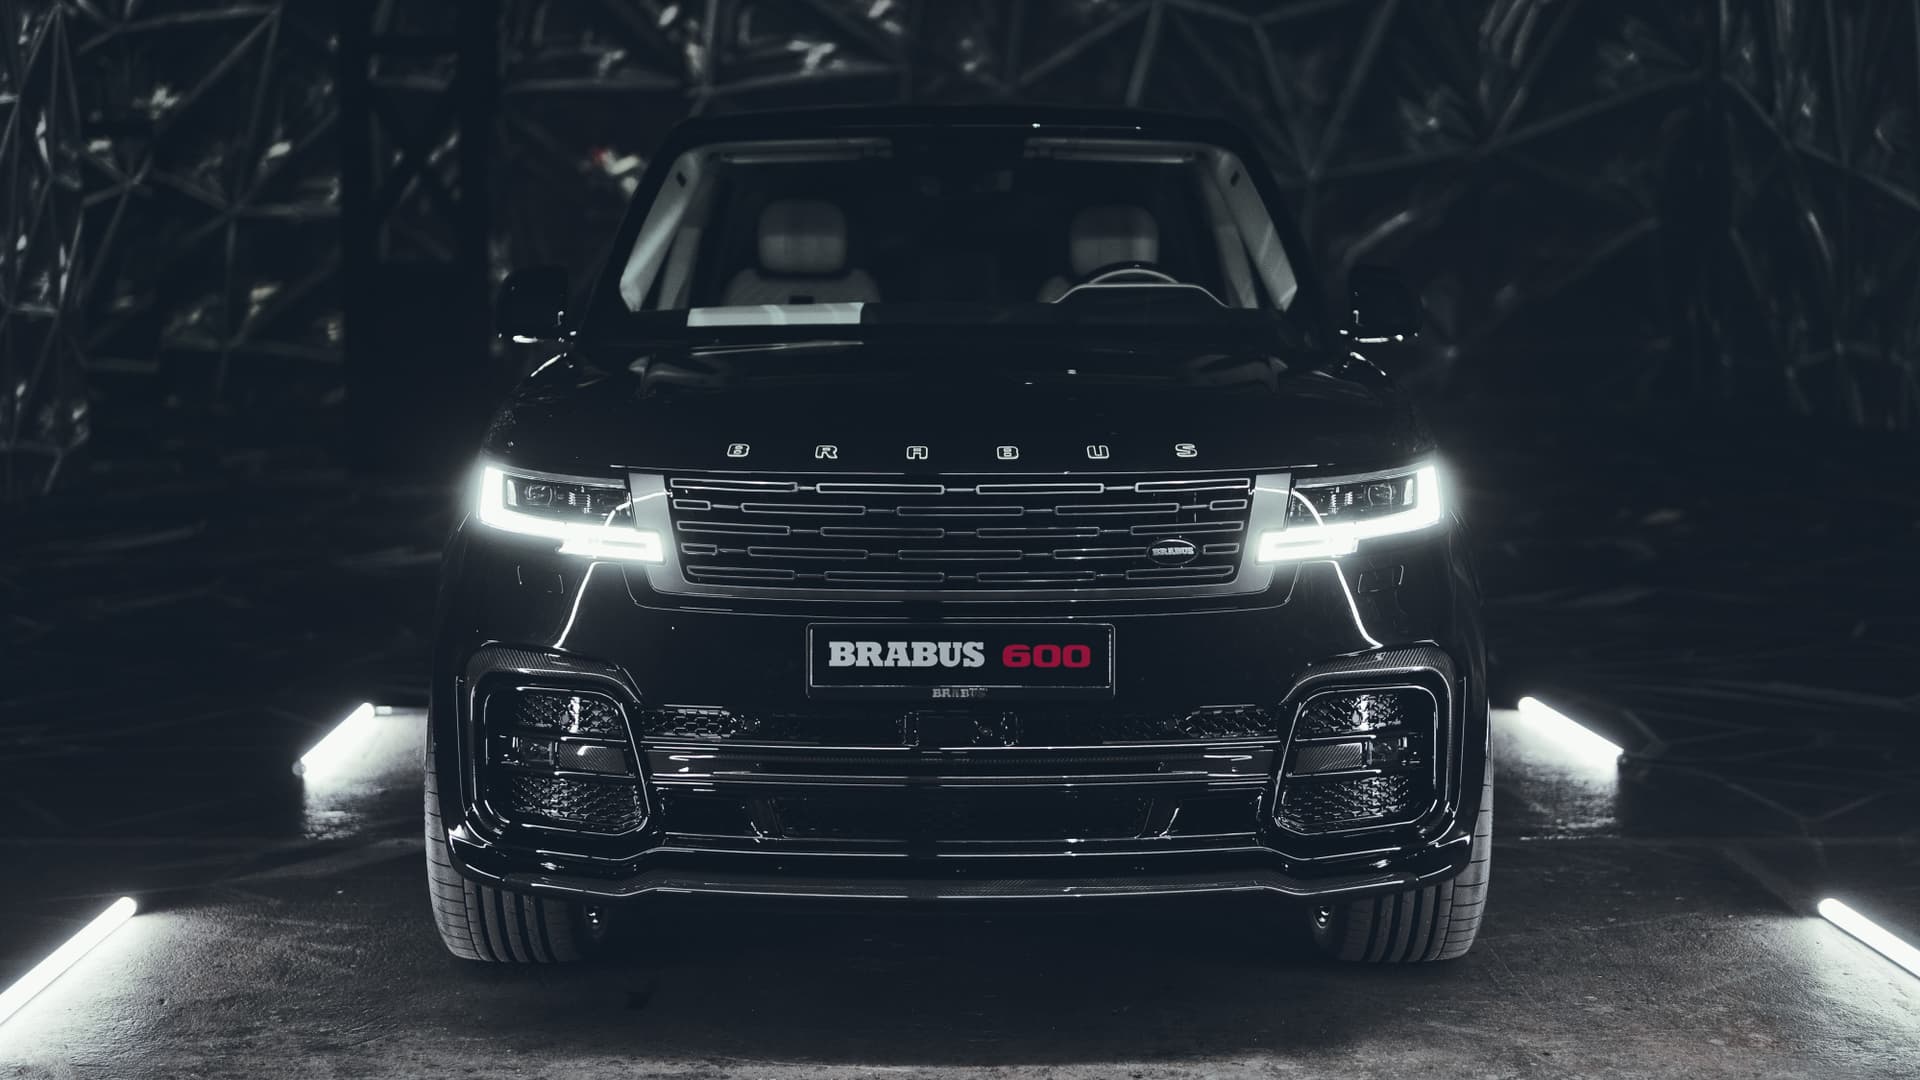 brabus, range rover, land rover, landrover, range rover vogue, wearnes automotive, range rover, land rover, landrover, wearnes automotive, modified, tuned, aftermarket, brabus works its magic on the range rover to create a 600hp 4x4 hot-rod